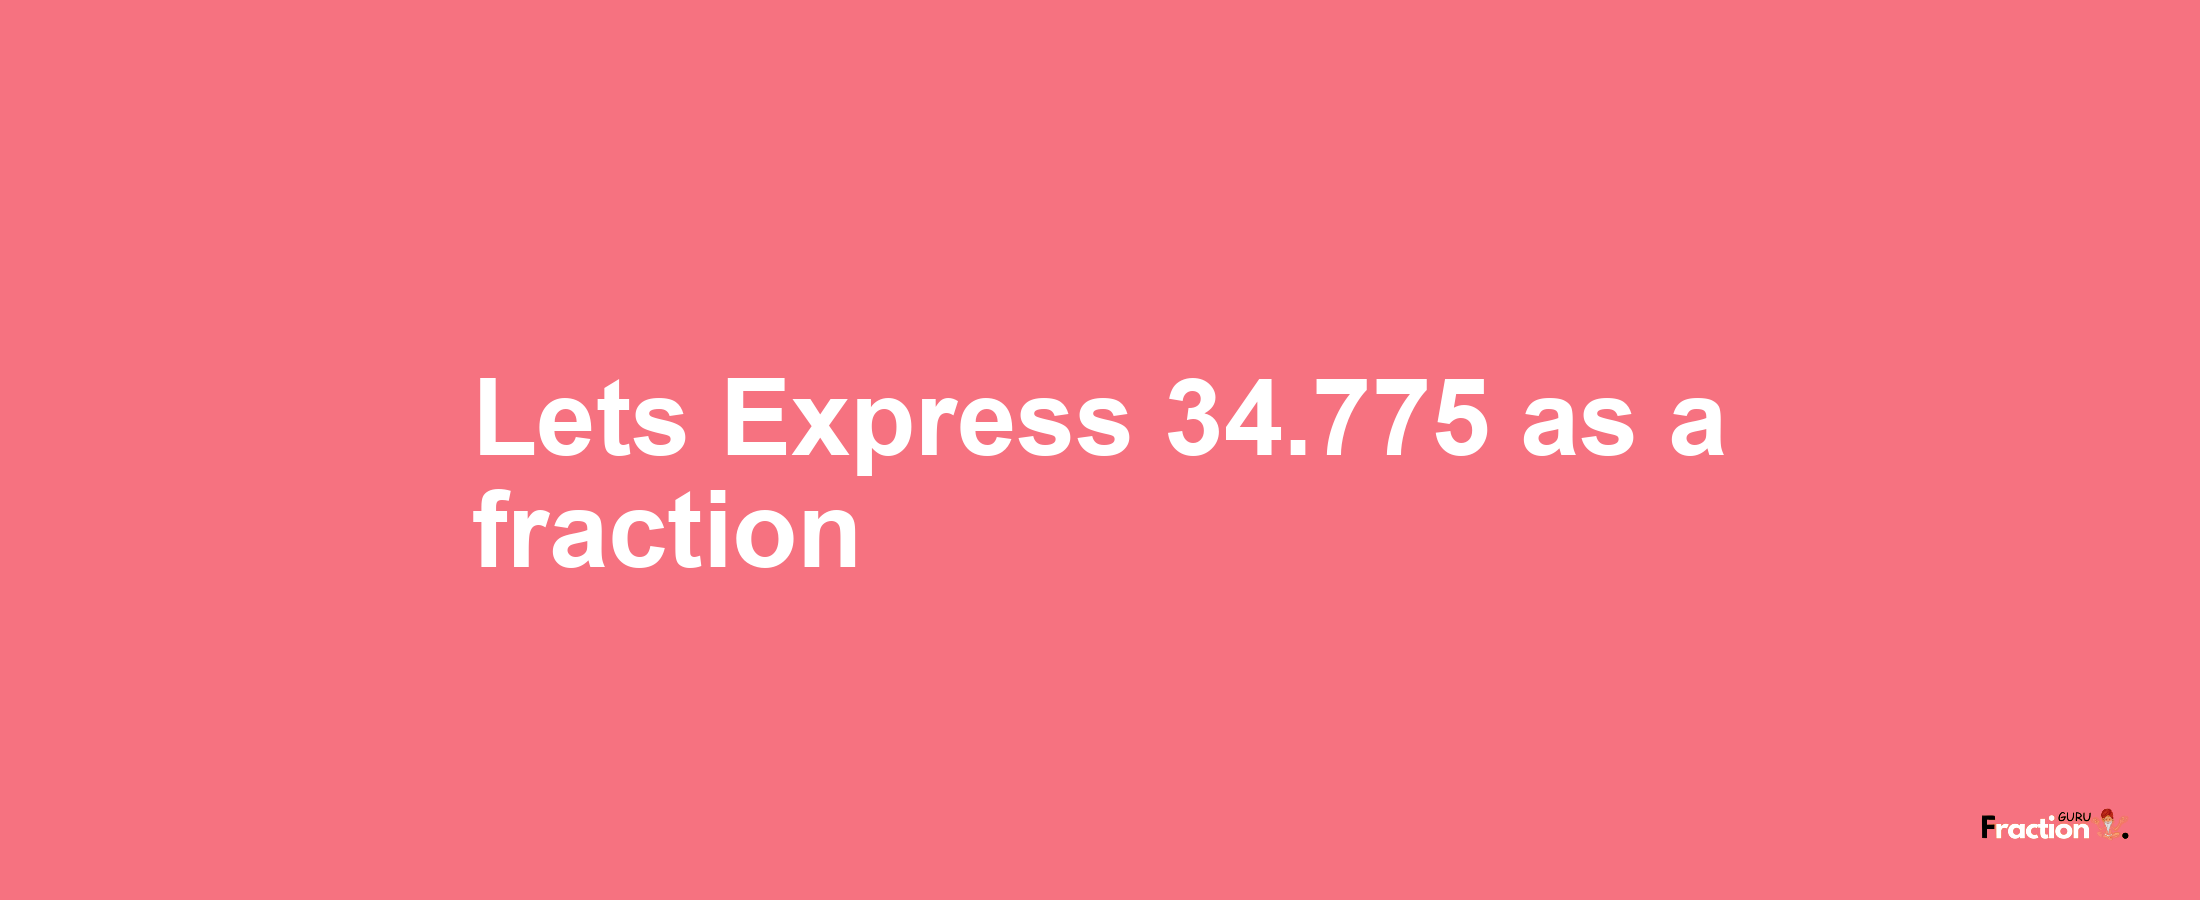 Lets Express 34.775 as afraction